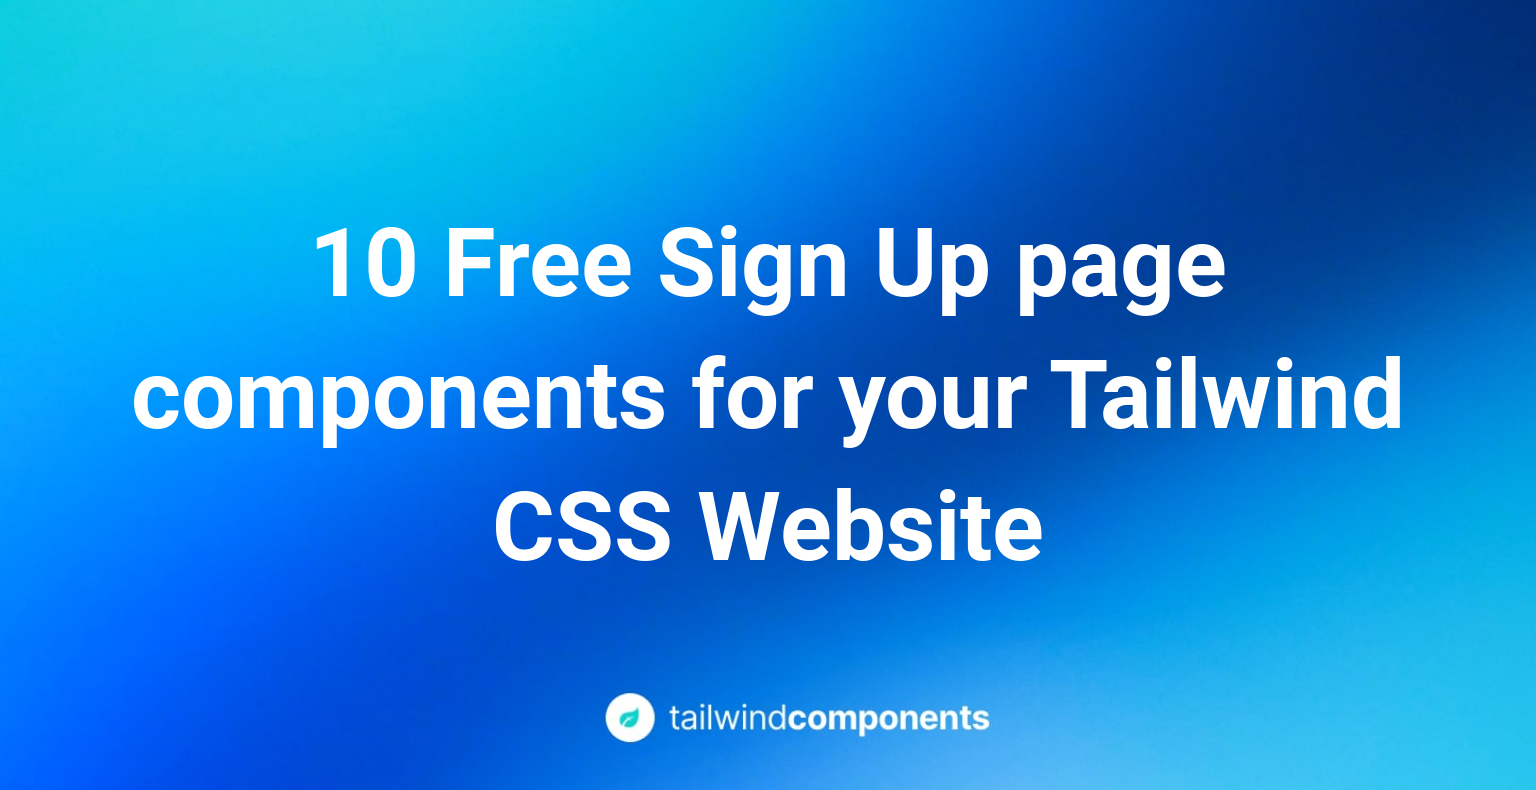 10 Free Sign Up page components for your Tailwind CSS Website Image